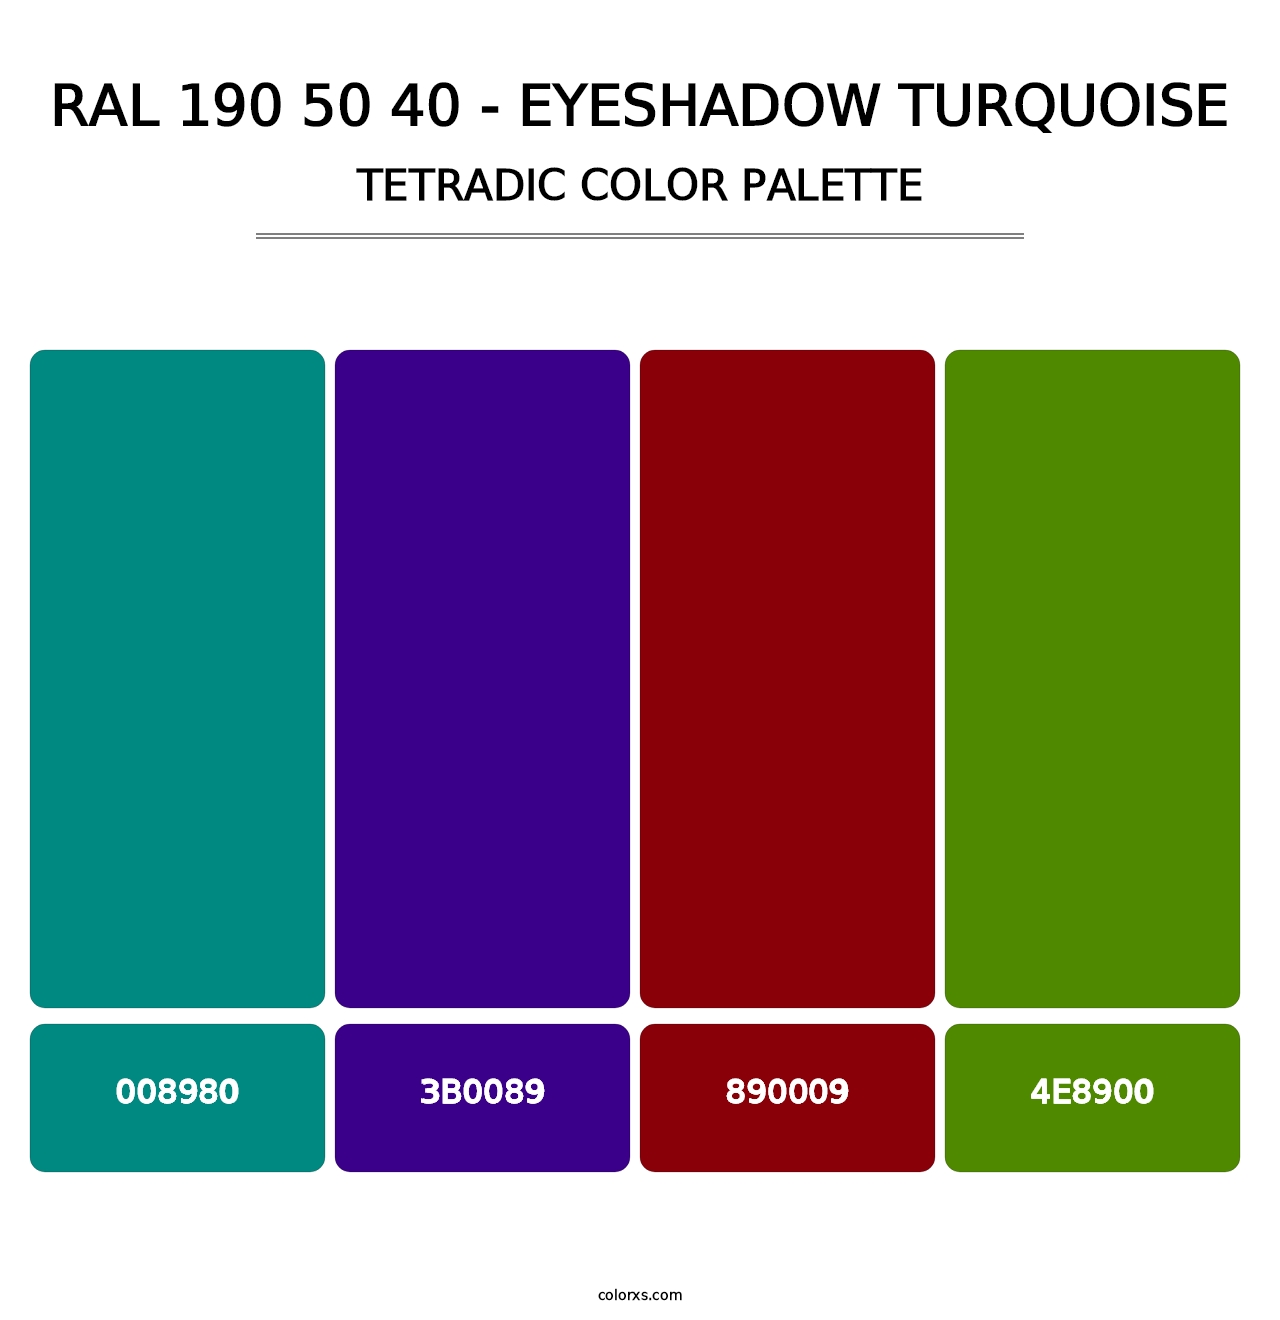 RAL 190 50 40 - Eyeshadow Turquoise - Tetradic Color Palette